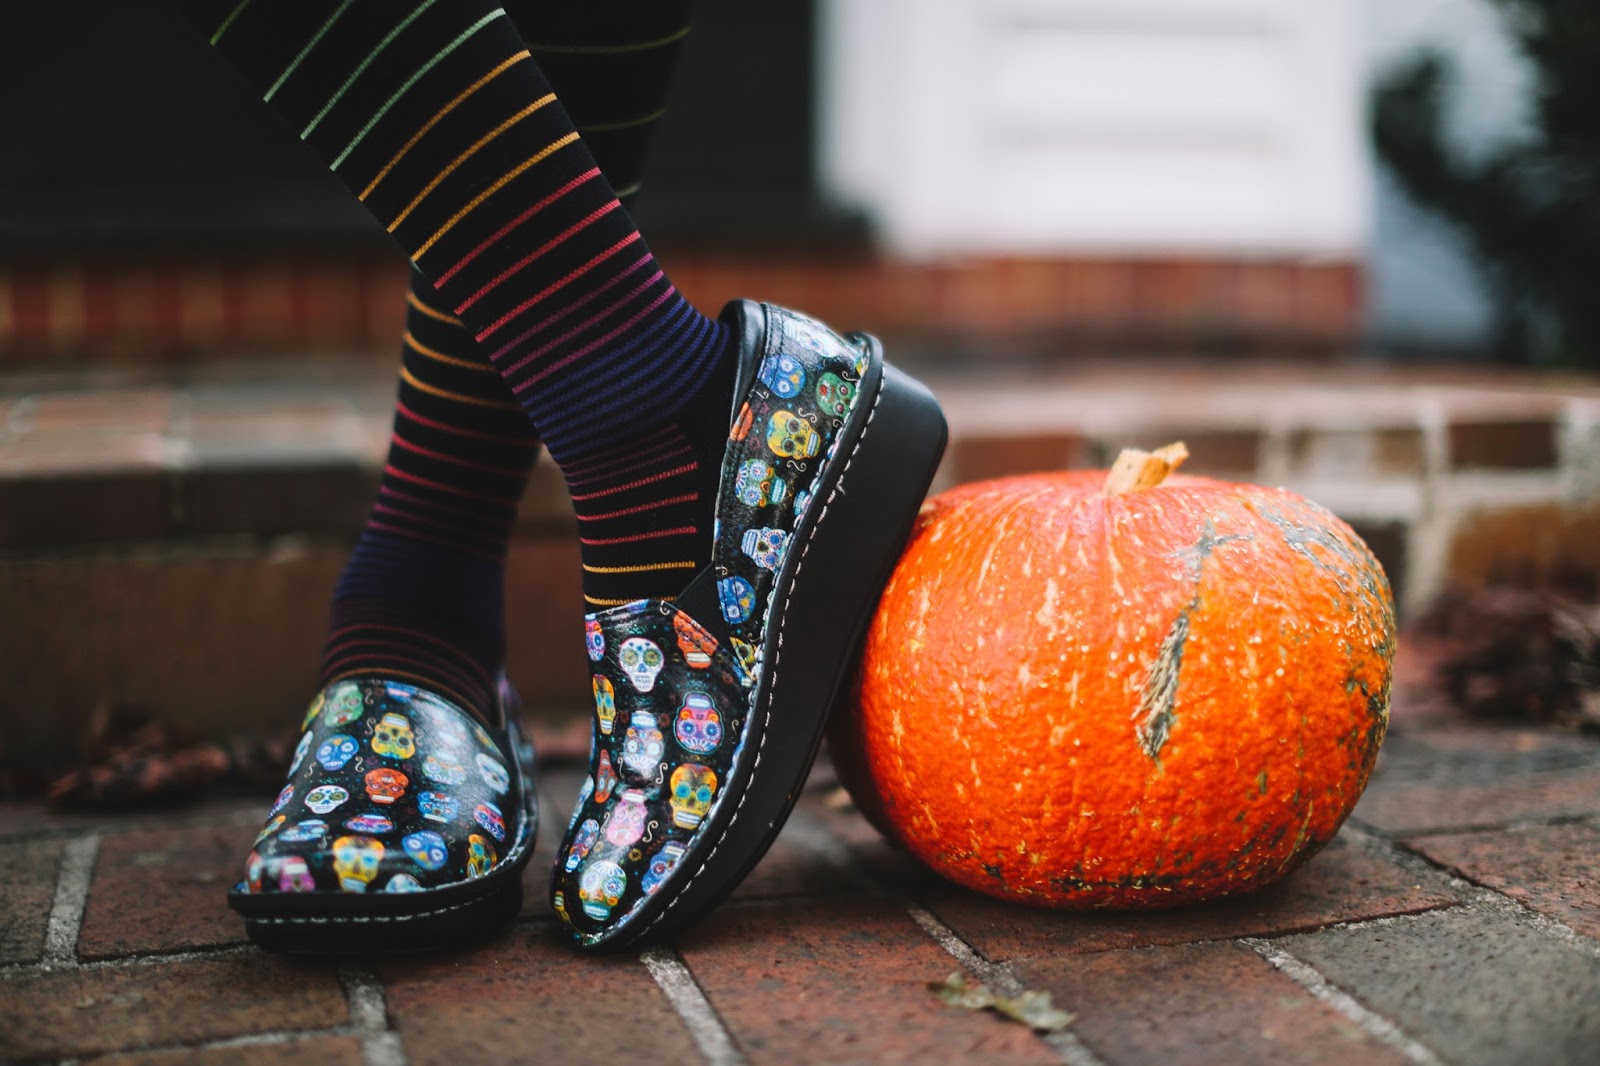 As cute as they are spooky the Debra Sugar Skulls was our best selling shoe of Fall 2015. Bright colors, playful accents, and toothy grins adorn the loafer in a way that reminds us of October’s fall harvest festivities. Sugar skulls are all over the place in Western culture adorning everything from rolling pins to bracelets to area rugs to S’well water bottles. As you slip into your Sockwells and don your Debras in Fall 2016, we invite you to reflect on the origins of this seasonal skull.  Skeletons are an iconic part of Dia de los Muertos, a Mexican celebration of the Day of the Dead. The three-day long fiesta begins on October 31st and ending on November 2nd. On these days, people believe that honoring late friends, family, and neighbors will bring future happiness to the living the following year.  In preparation for this homecoming, the families craft altars in their homes and cemeteries decorating them with the favorite foods, drinks, and gifts of the dearly departed. People place sugar skulls on the altars along with marigolds and pan de muerto. One of the most famous of the skeletal characters to make an appearance for the festivities is La Catrina. The creation of Antonio Vanegas Arroyo, she is an elegantly dressed figure wearing a French-inspired hat. Intended to make a political statement in pre-Revolutionary Mexico she represents wealth and serves as a reminder that death is the one true equalizer between classes.  The calaveritas de azucar are a combination of sugar, water, and meringue powder you press into a skull mold. Decorated with bright icings, marigolds, foil, and even the name of the deceased these skulls are meant to be colorful- a representation and celebration of the living. Mexicans see this vibrant pigment as a sweet reminder of the inevitability of the afterlife.  In contrast to Halloween, when people fear and evade death at all costs, Dia de los Muertos is intended to be a celebration and the Mexican attitude toward death itself is reflected in the playful and celebratory papier mache parades that flood the streets of Mexico City. Attendees paint their faces to joyfully dance on the line between life and death before heading to late night candle light vigils in cemeteries.  How can you get in the mood for this celebration of all things Day of the Dead? Your favorite Alegrias are a good start, but we want to sweeten the deal with a gift with purchase to keep your feet comfy and warm while you attend your favorite autumn festivities.   That’s right! You heard us! We’ve partnered with Sockwell to give away a free pair with every purchase of a Debra Sugar Skull or Keli PRO Sugar Skull Dottie between now and October 31st.  What’s so special about these socks? Made with a merino wool and bamboo blend these socks are meant to be high-performance compression socks while also being visually attractive and physically comfortable. The designers kept the wearer’s needs in mind and incorporated two levels of graduated compression. Better yet these socks are all-American in both the materials and mills used in production.  Even if you already have your Alegria Sugar Skull shoes, you’ll want to pick up a pair of Sockwell socks for the perfect match in comfort and style.  Hit the leaf-covered streets this October in the most popular pattern of the season with the best socks you’ve ever worn, and you’ll be ready for whatever tricks and treats come your way. Happy Harvest! 